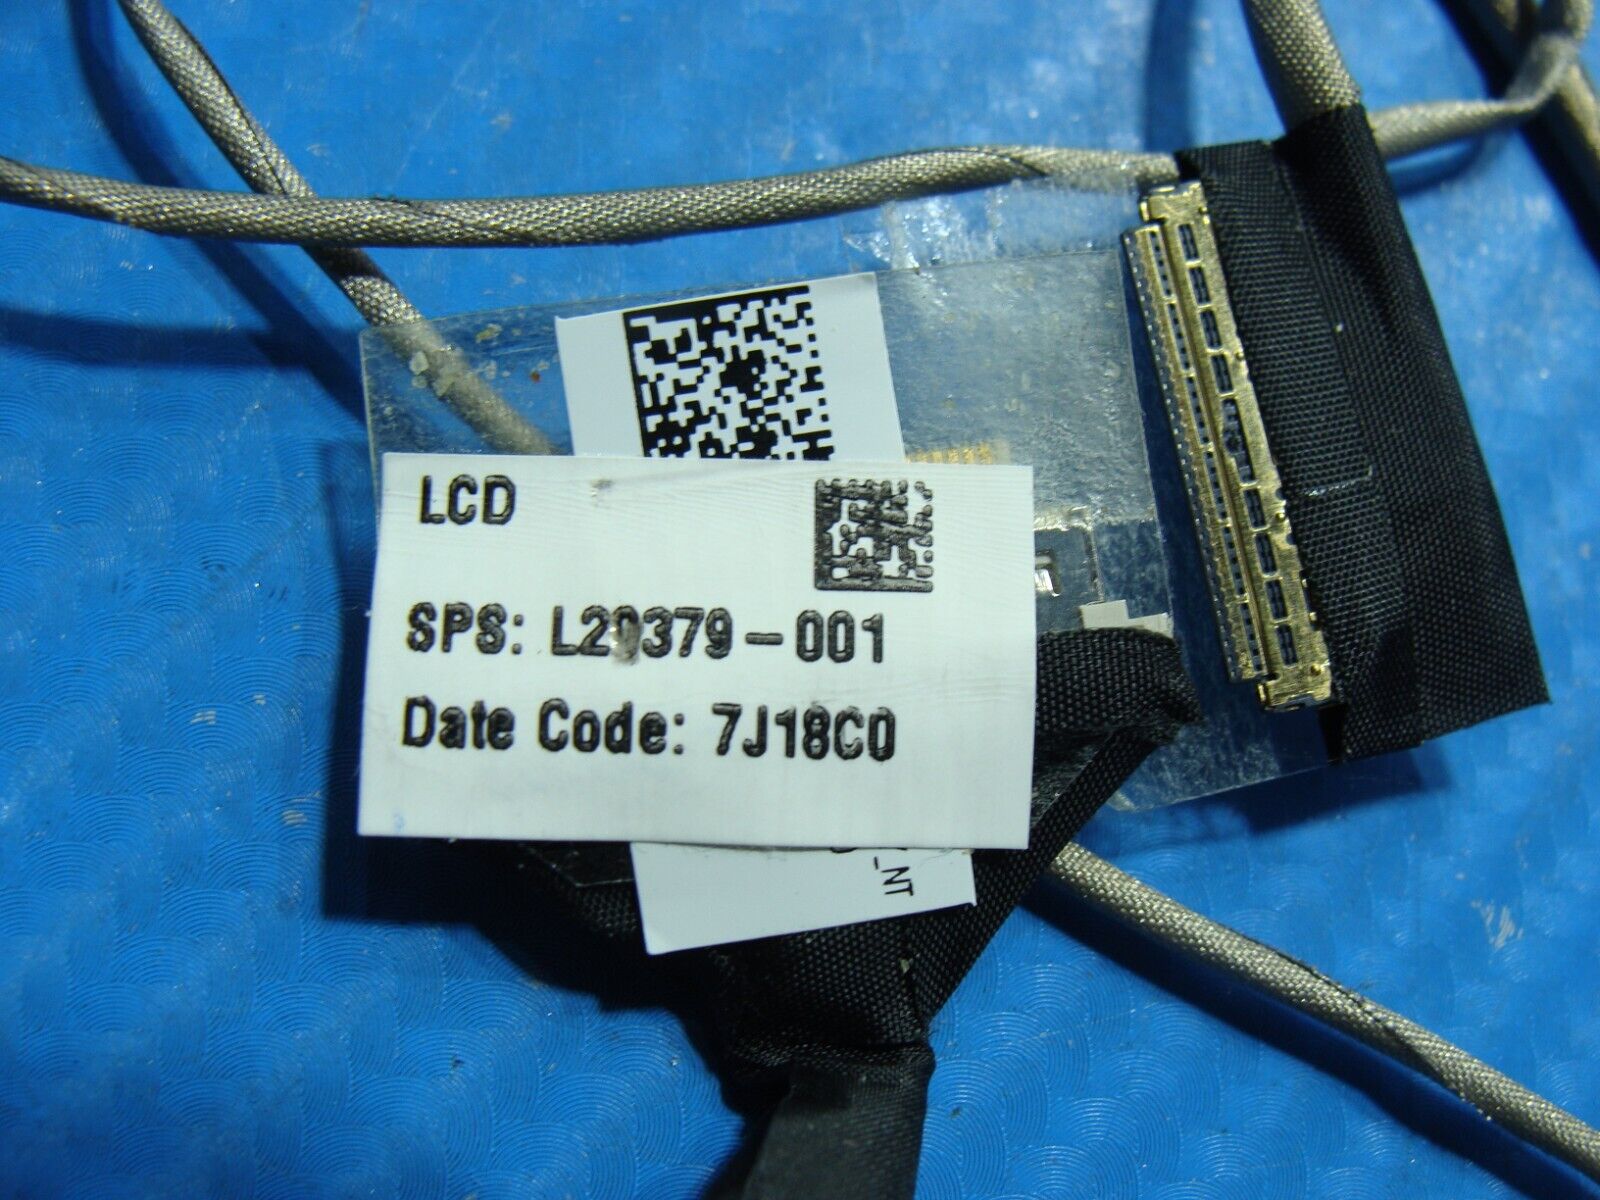 HP 15.6” 15-db0005dx Genuine Laptop LCD Video Cable w/WebCam L20379-001